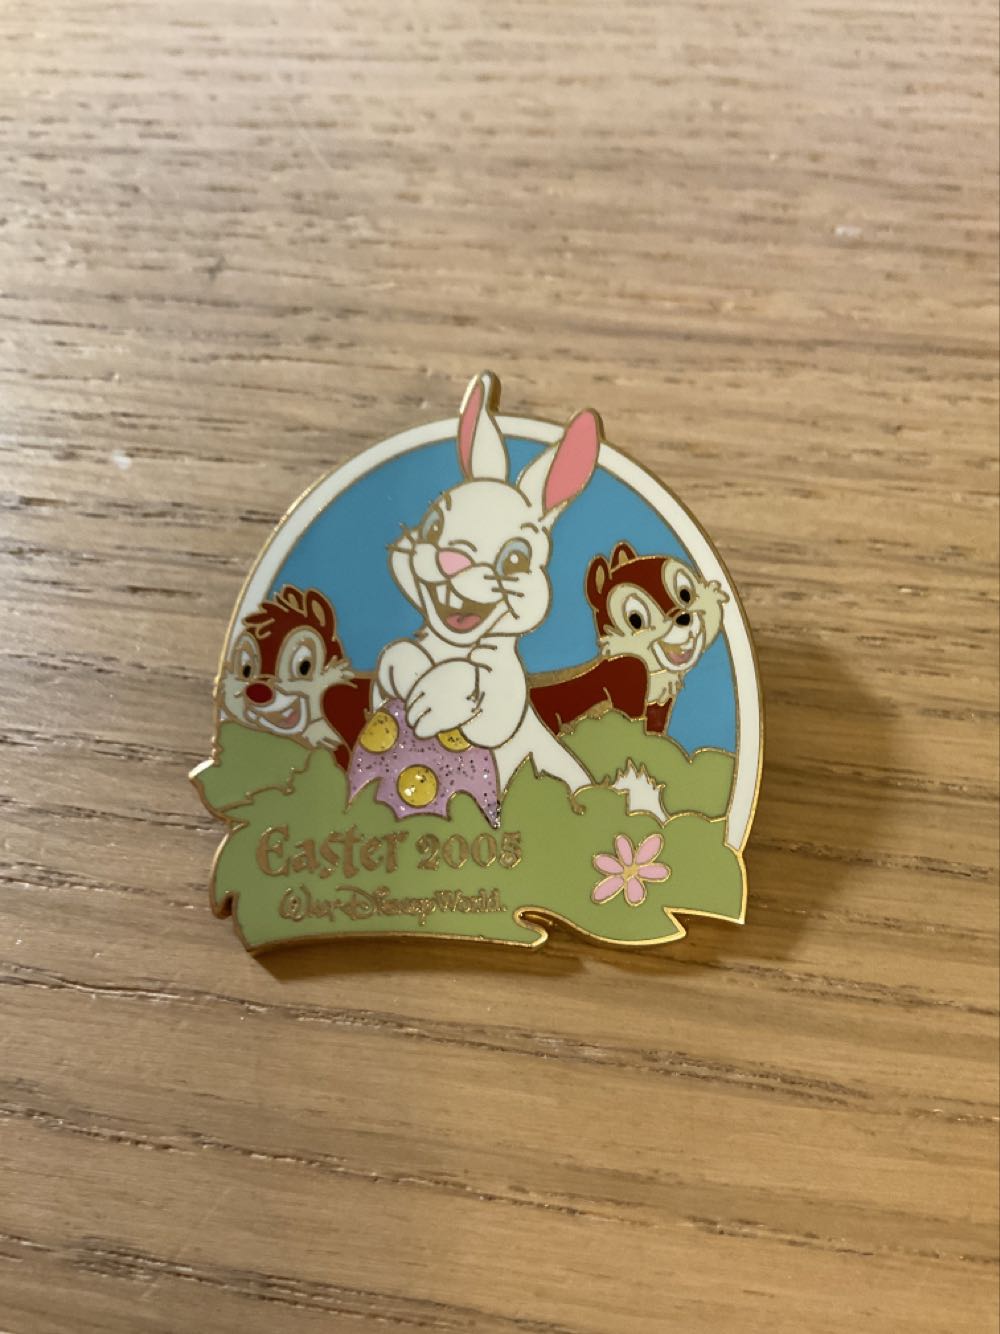 Chip & Dale - Easter 2005 - Ltd Edition 1500  pin collectible - Main Image 1